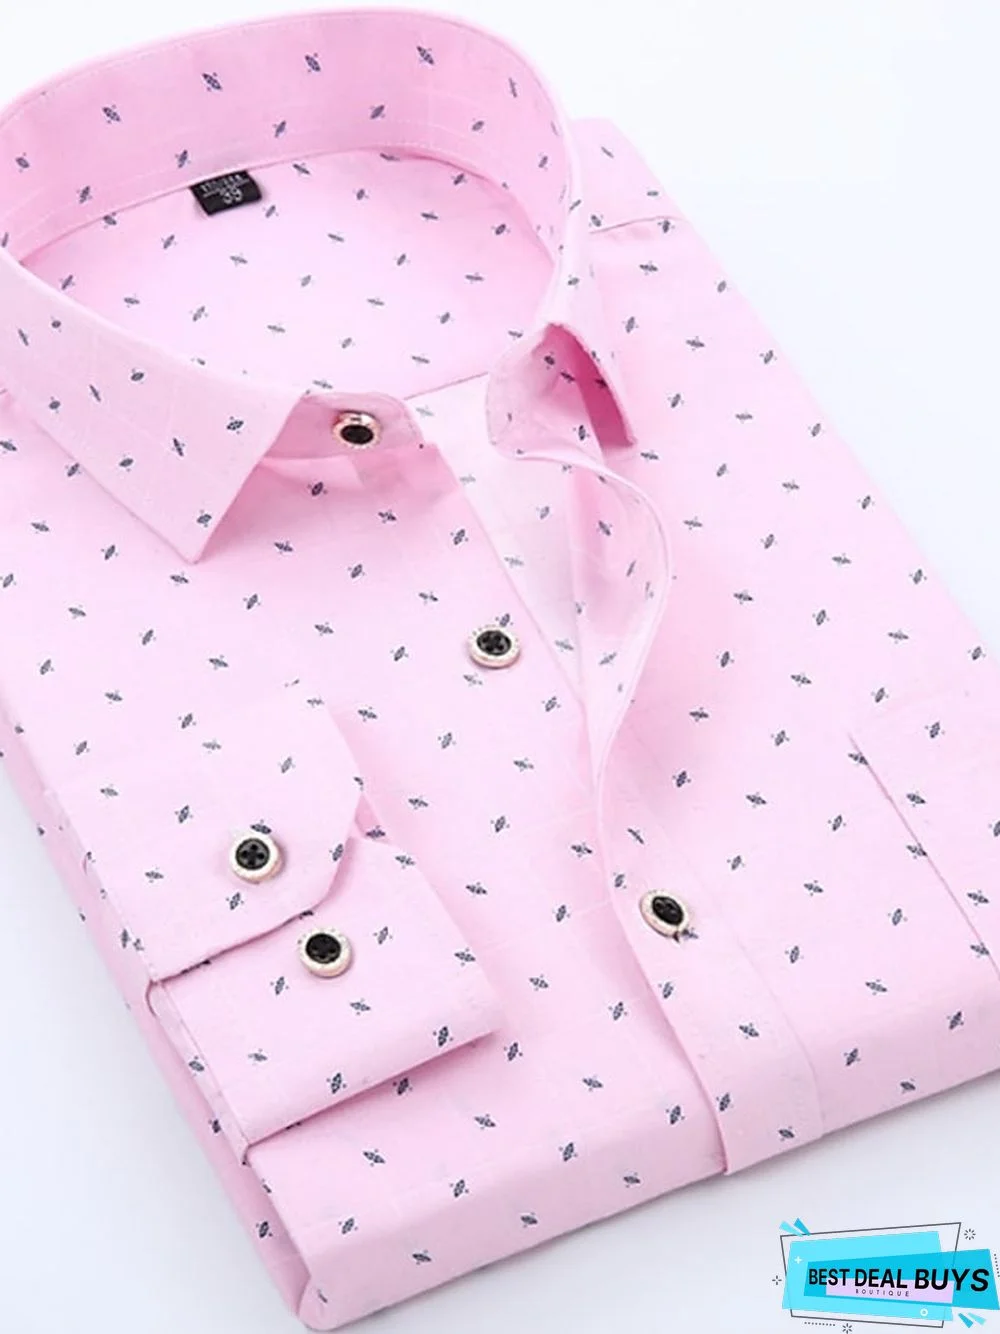 Men's Shirt Button Up Shirt Collared Shirt Long Sleeve White Pink Blue Graphic Prints Wedding Party Clothing Apparel